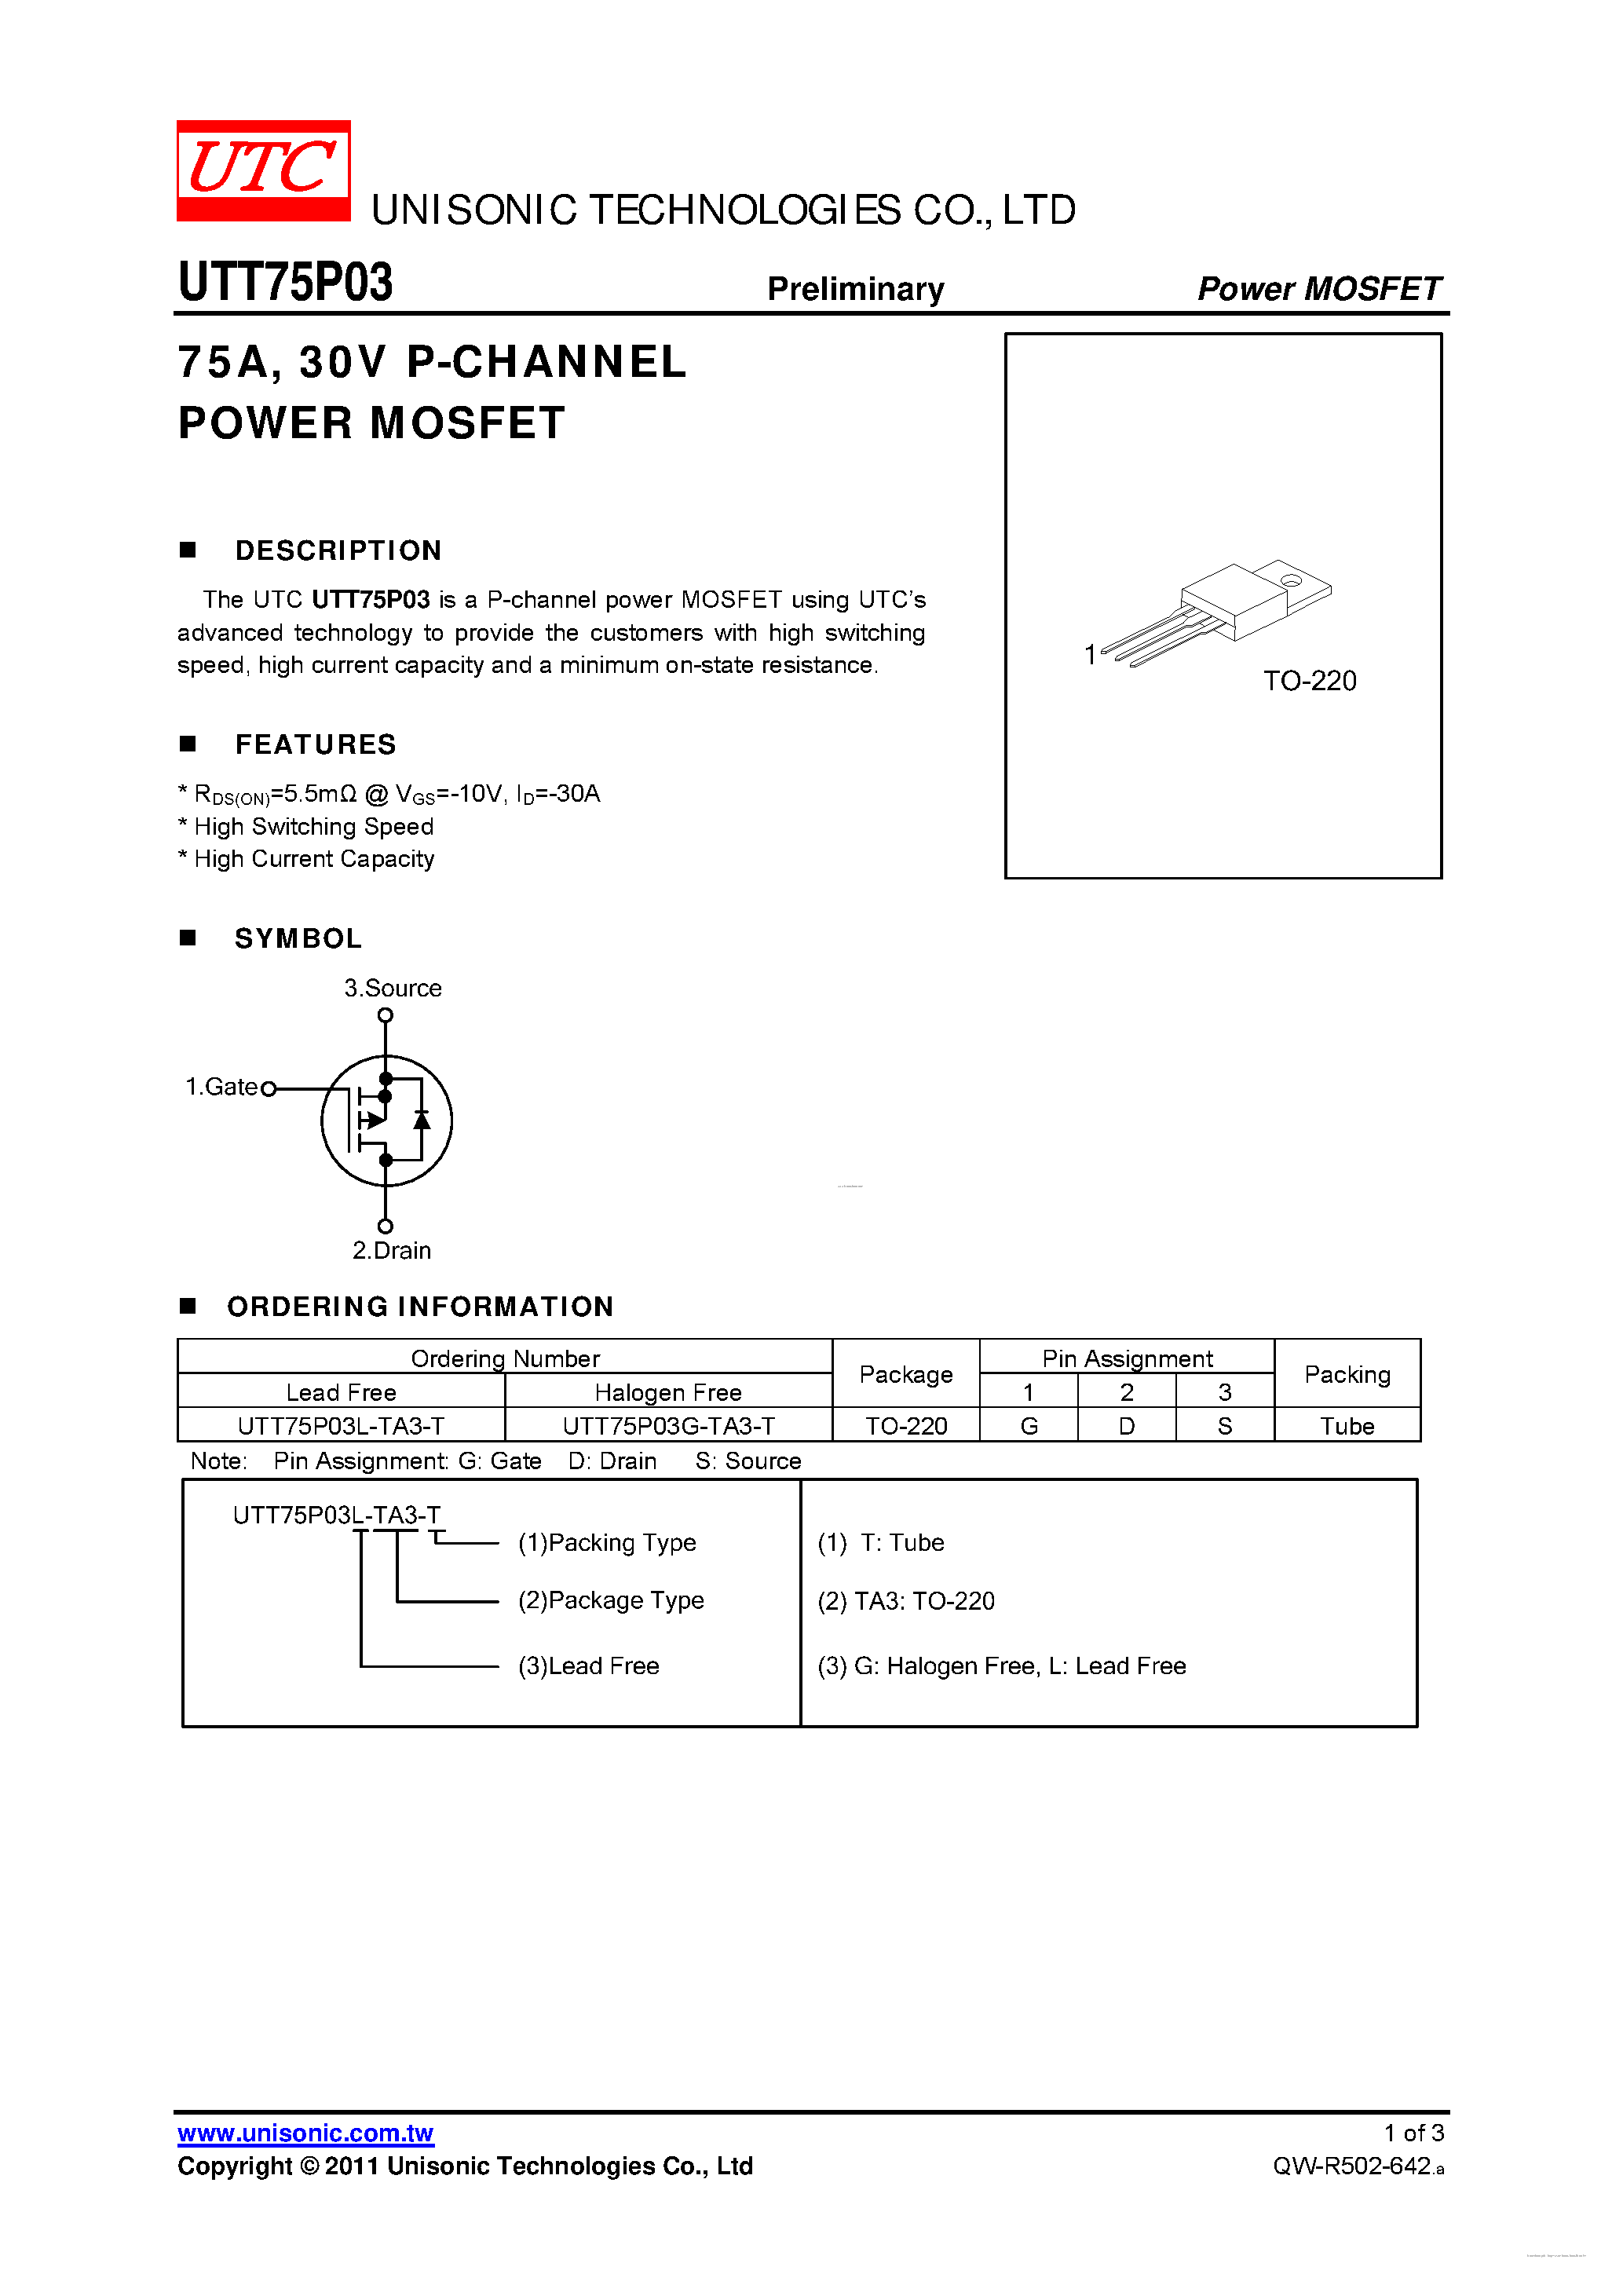 Datasheet UTT75P03 - P-CHANNEL POWER MOSFET page 1